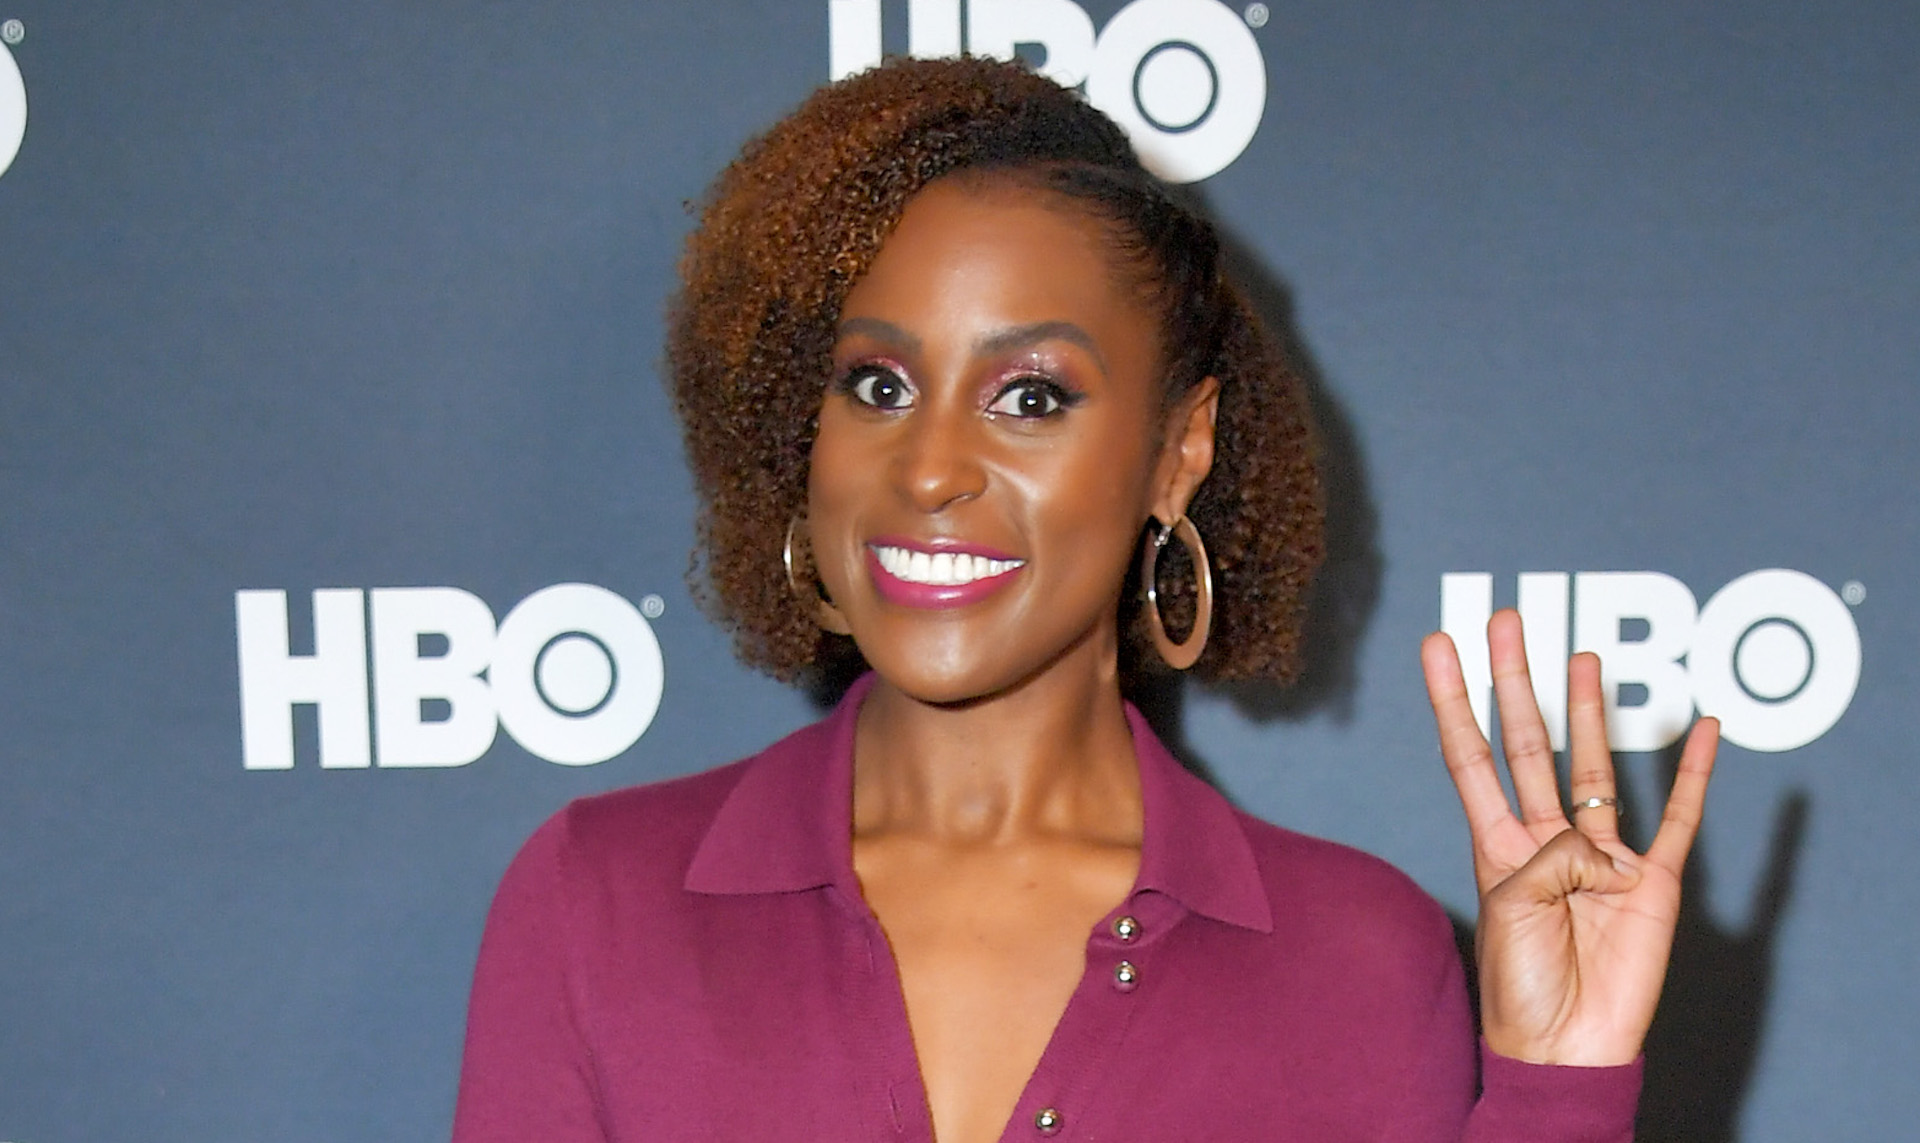 Issa Rae Scores 8-Episode Order for HBO Max Comedy 'Rap Sh*t,' City Girls to Serve as Co-Executive Producers